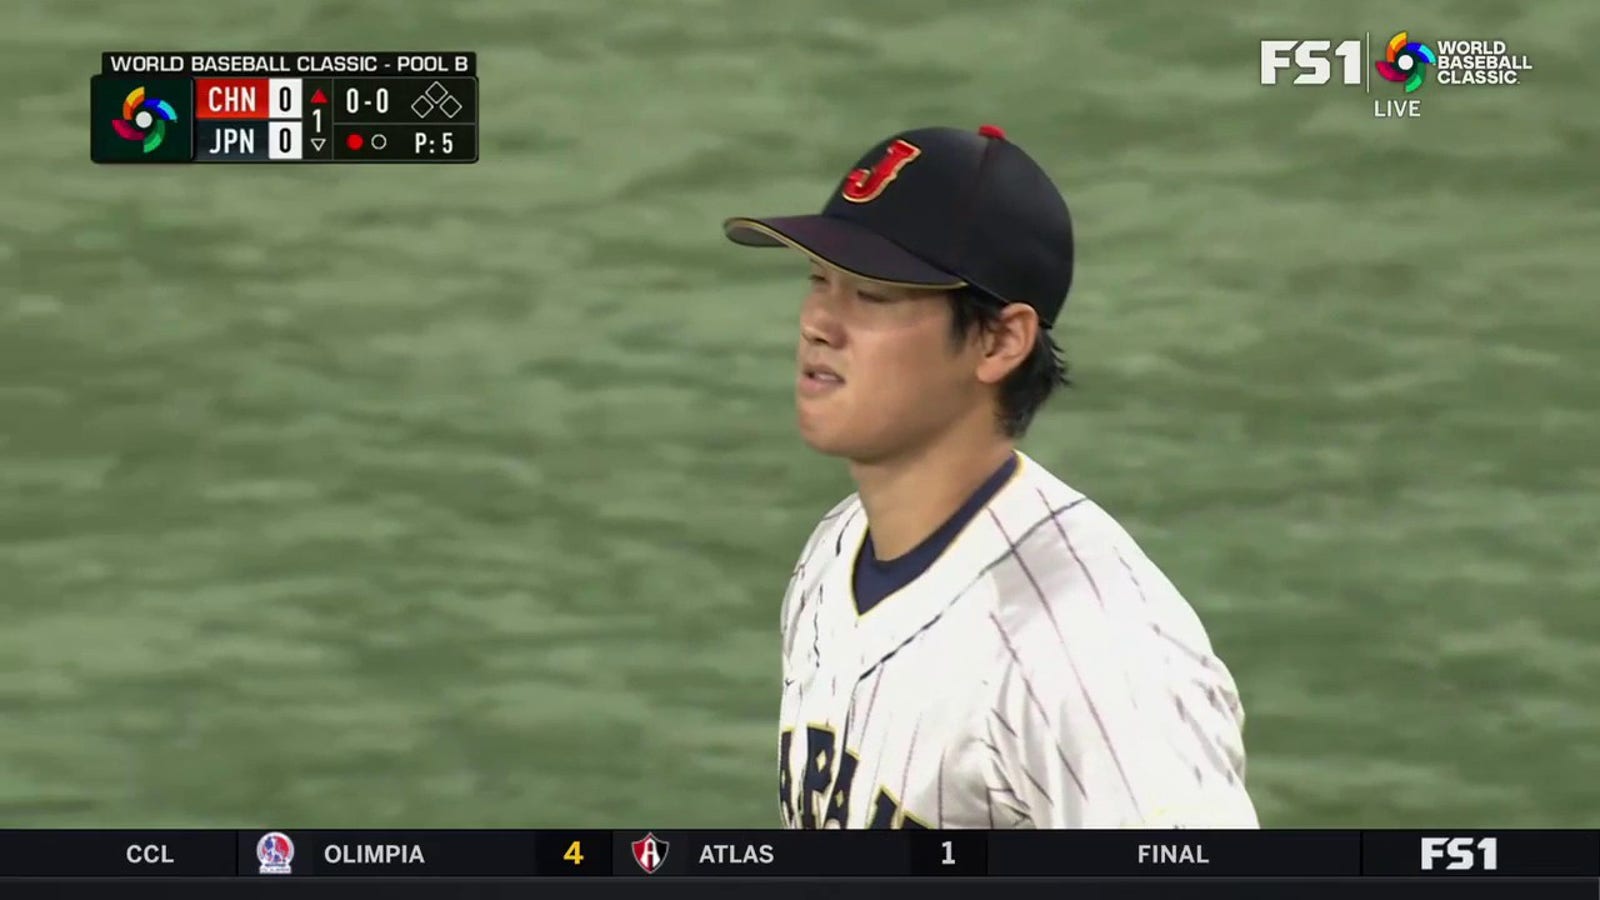 Japan's Shohei Ohtani records his first strikeout of the 2023 World Baseball Classic vs. China!